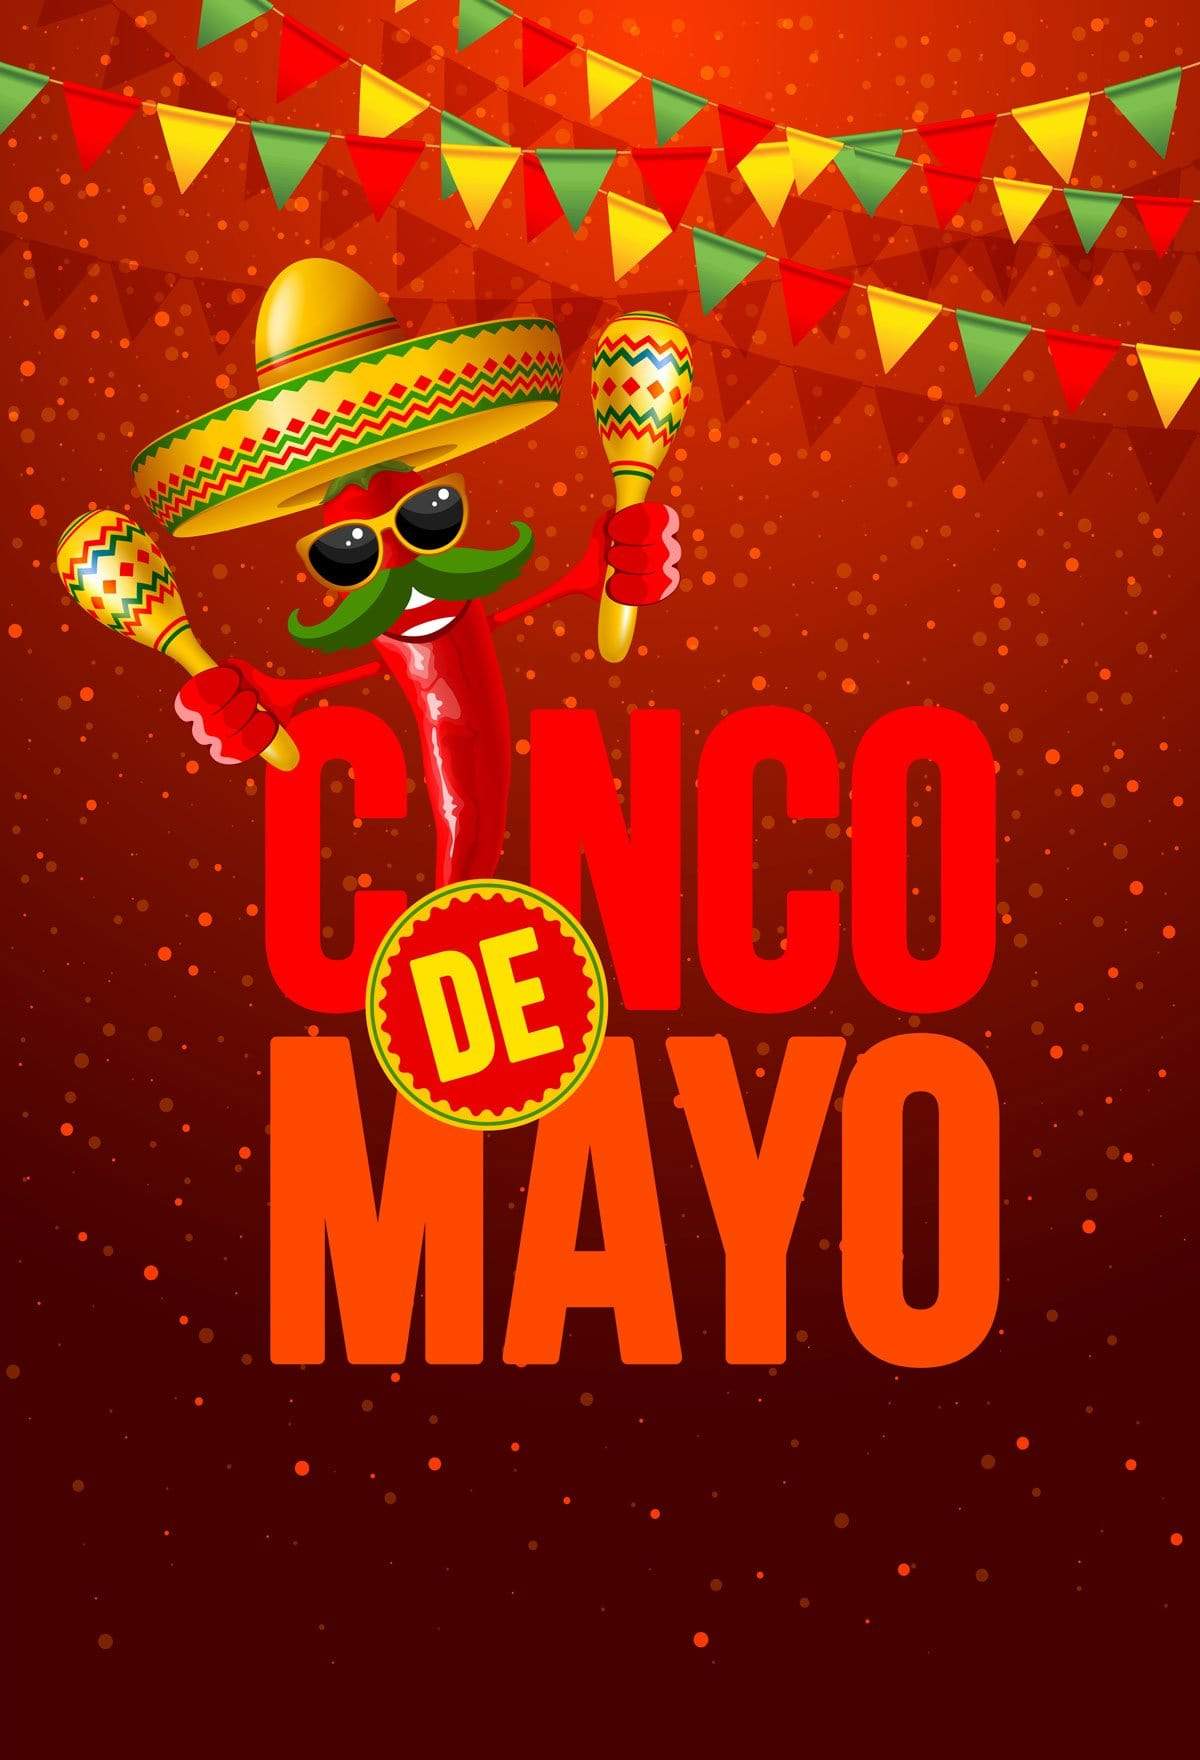 Kate May 5 Fiesta flag Party Backdrop Cinco De Mayo Carnival Background